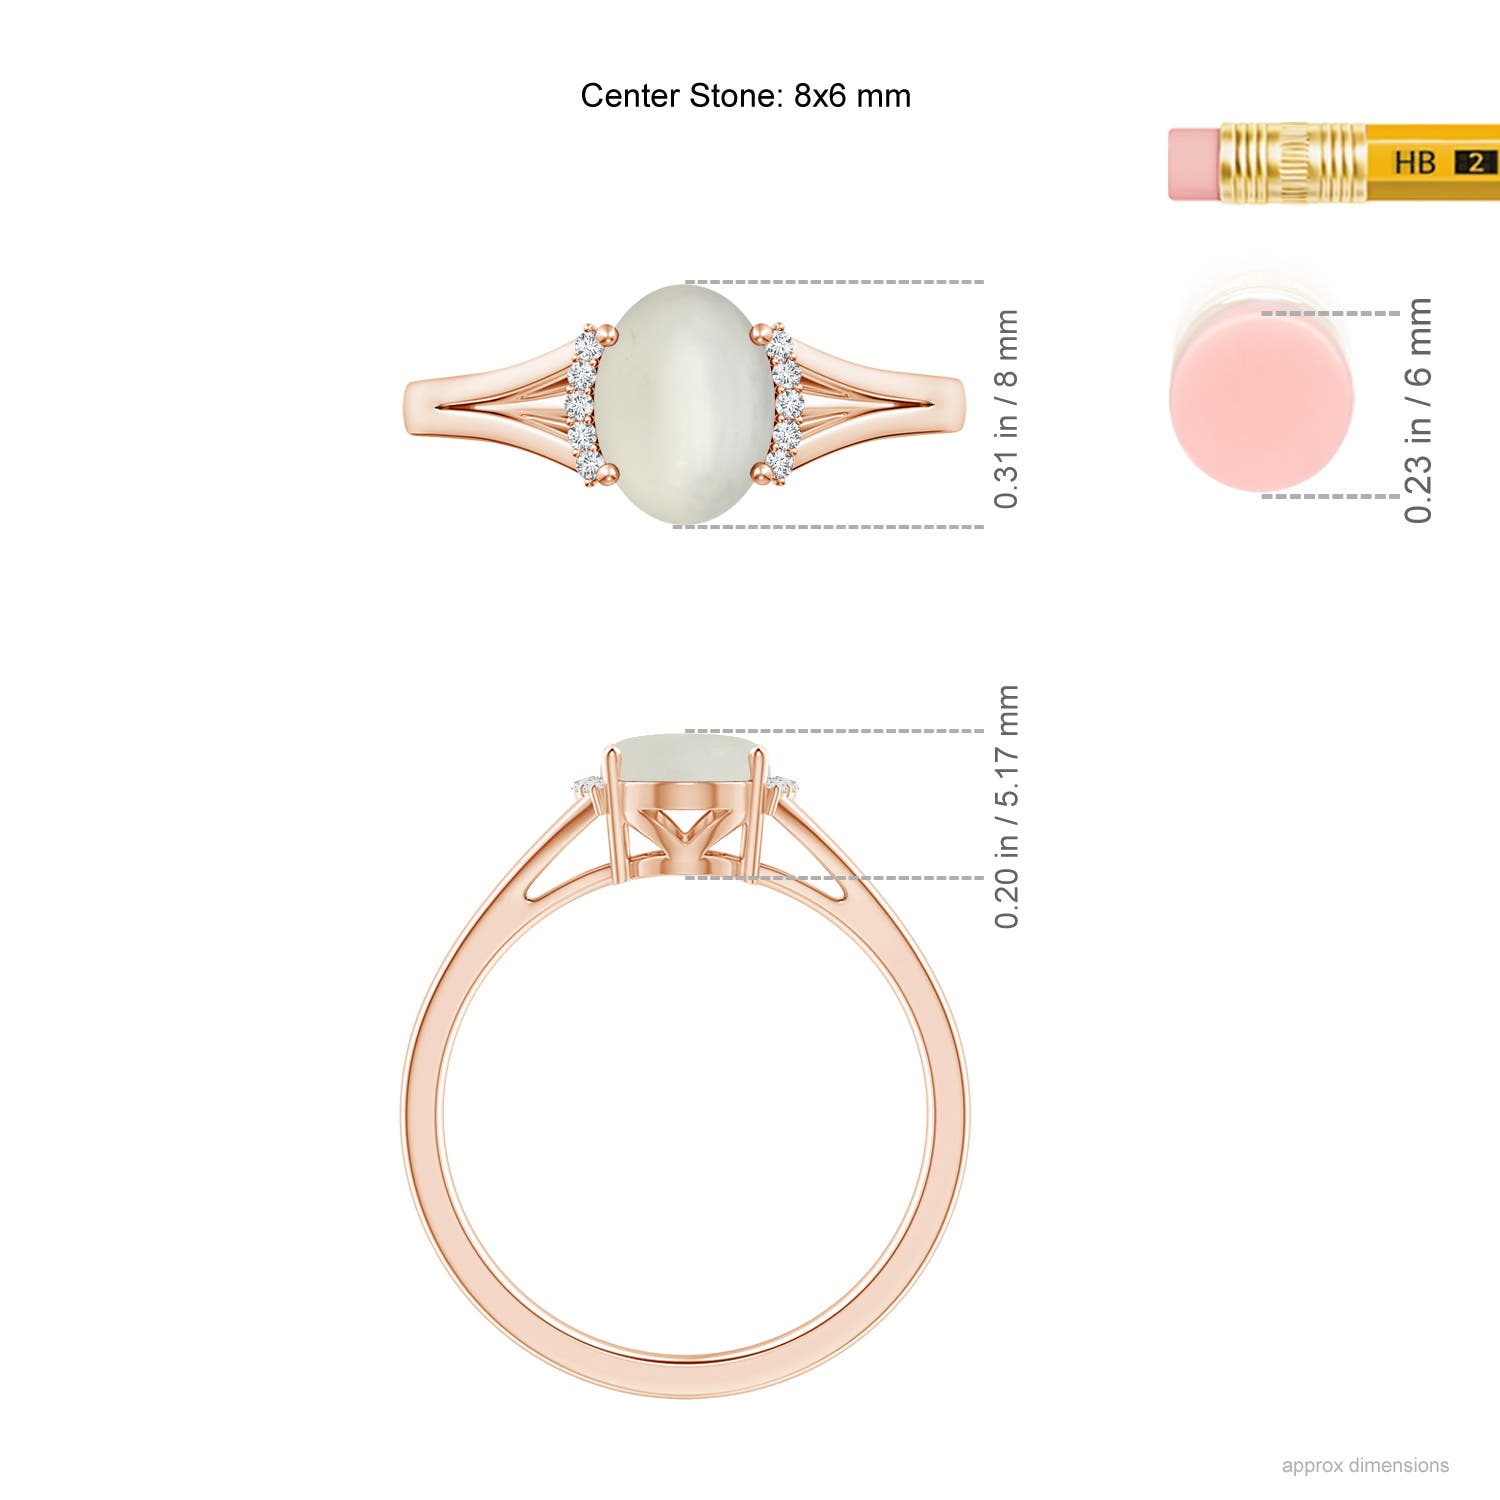 AAA - Moonstone / 1.15 CT / 14 KT Rose Gold